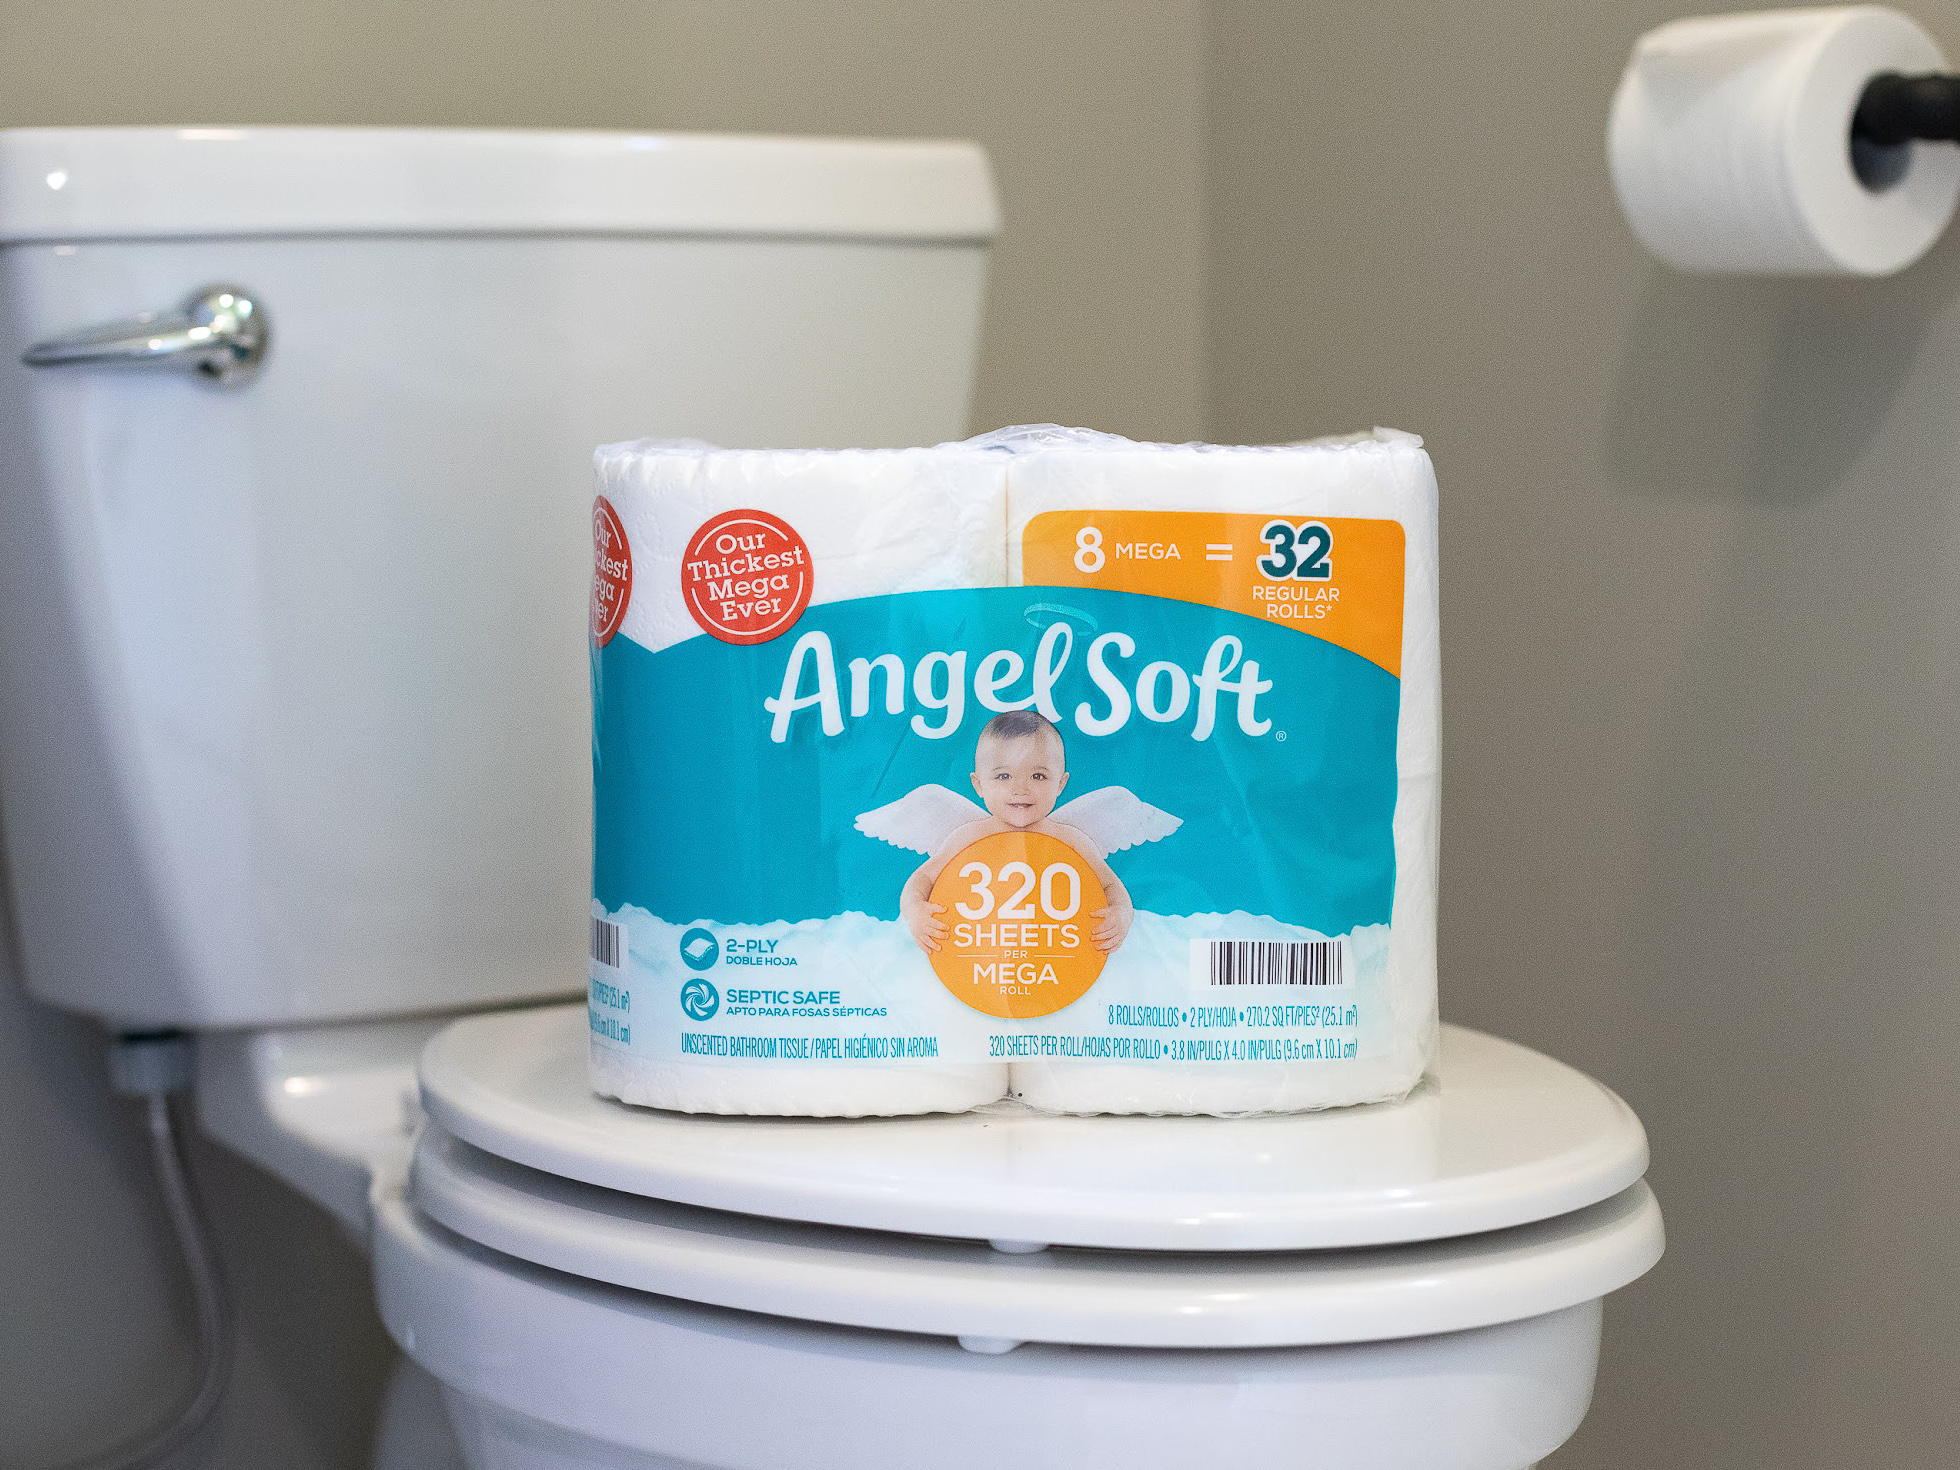 Angel Soft Bath Tissue As Low As $3.49 At Kroger